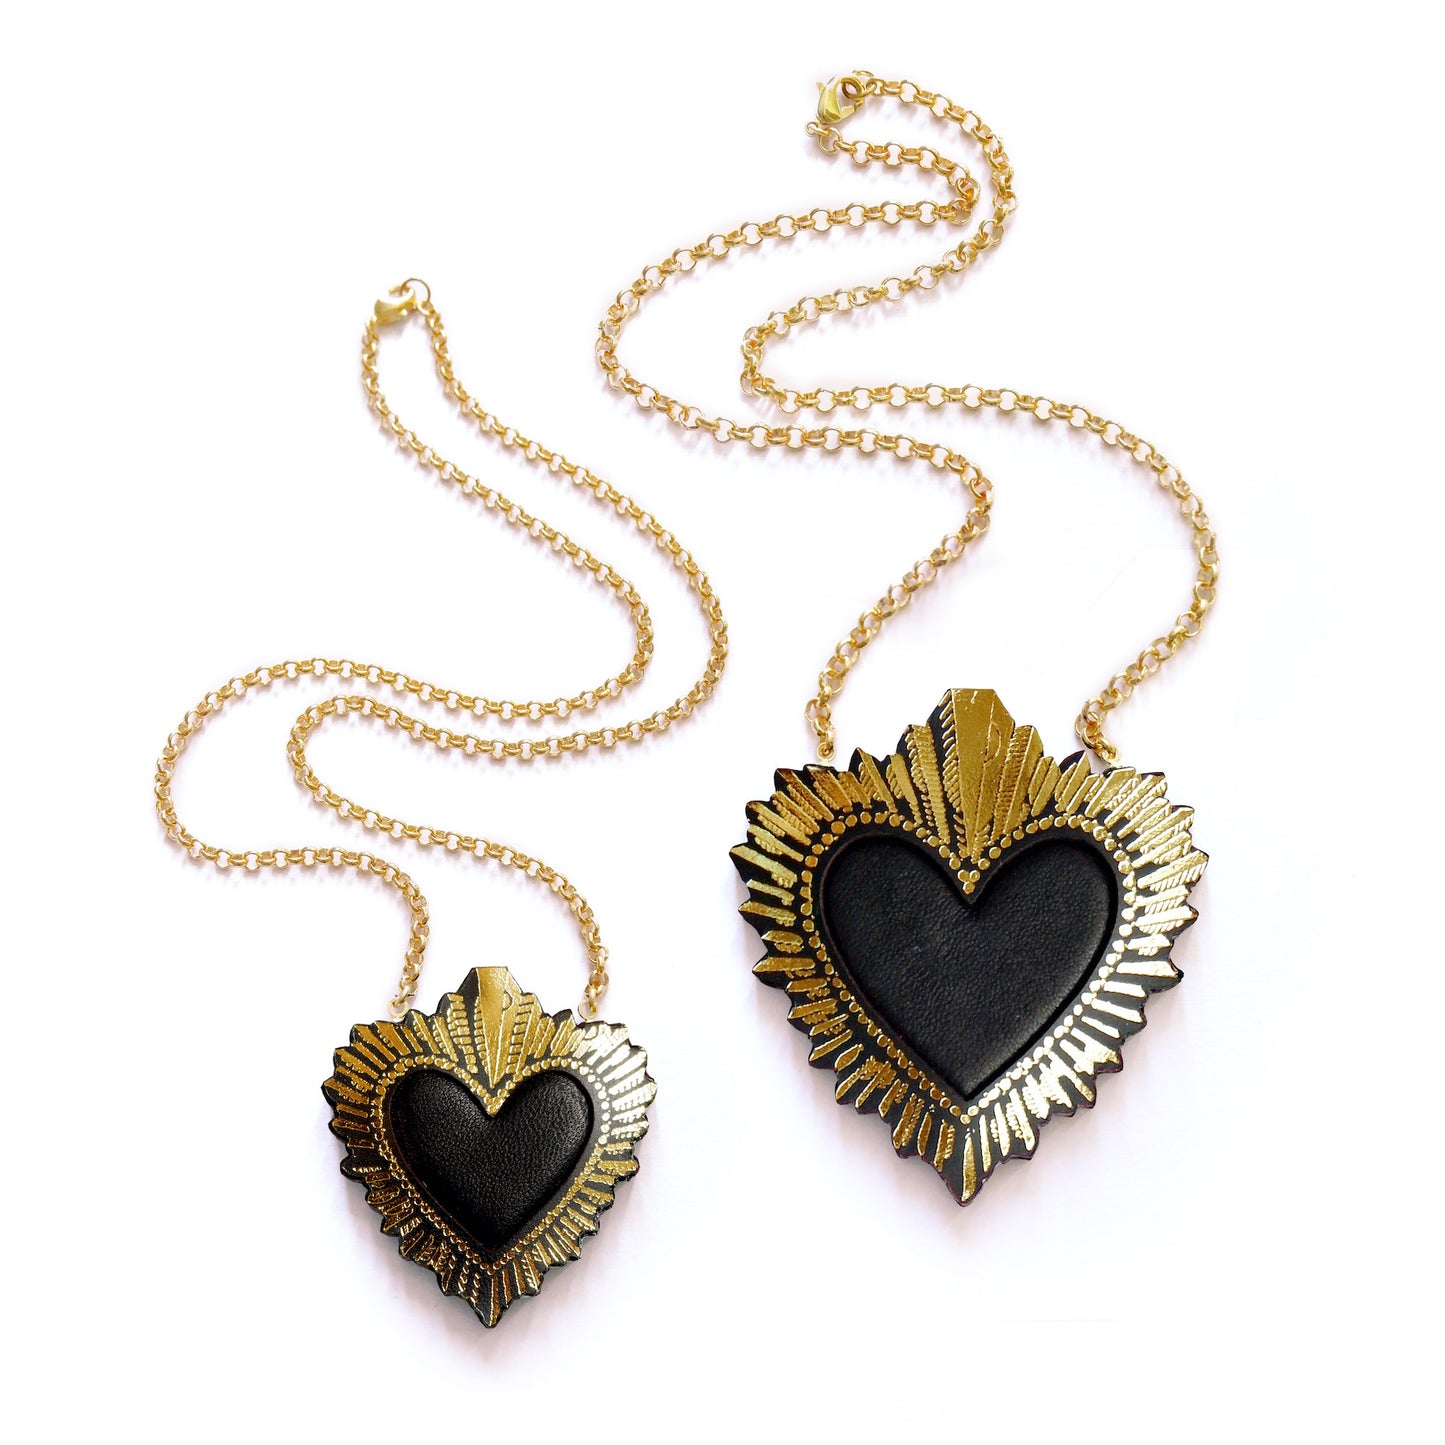 two sizes of black leather sacred heart pendant necklace, on gold belcher chain